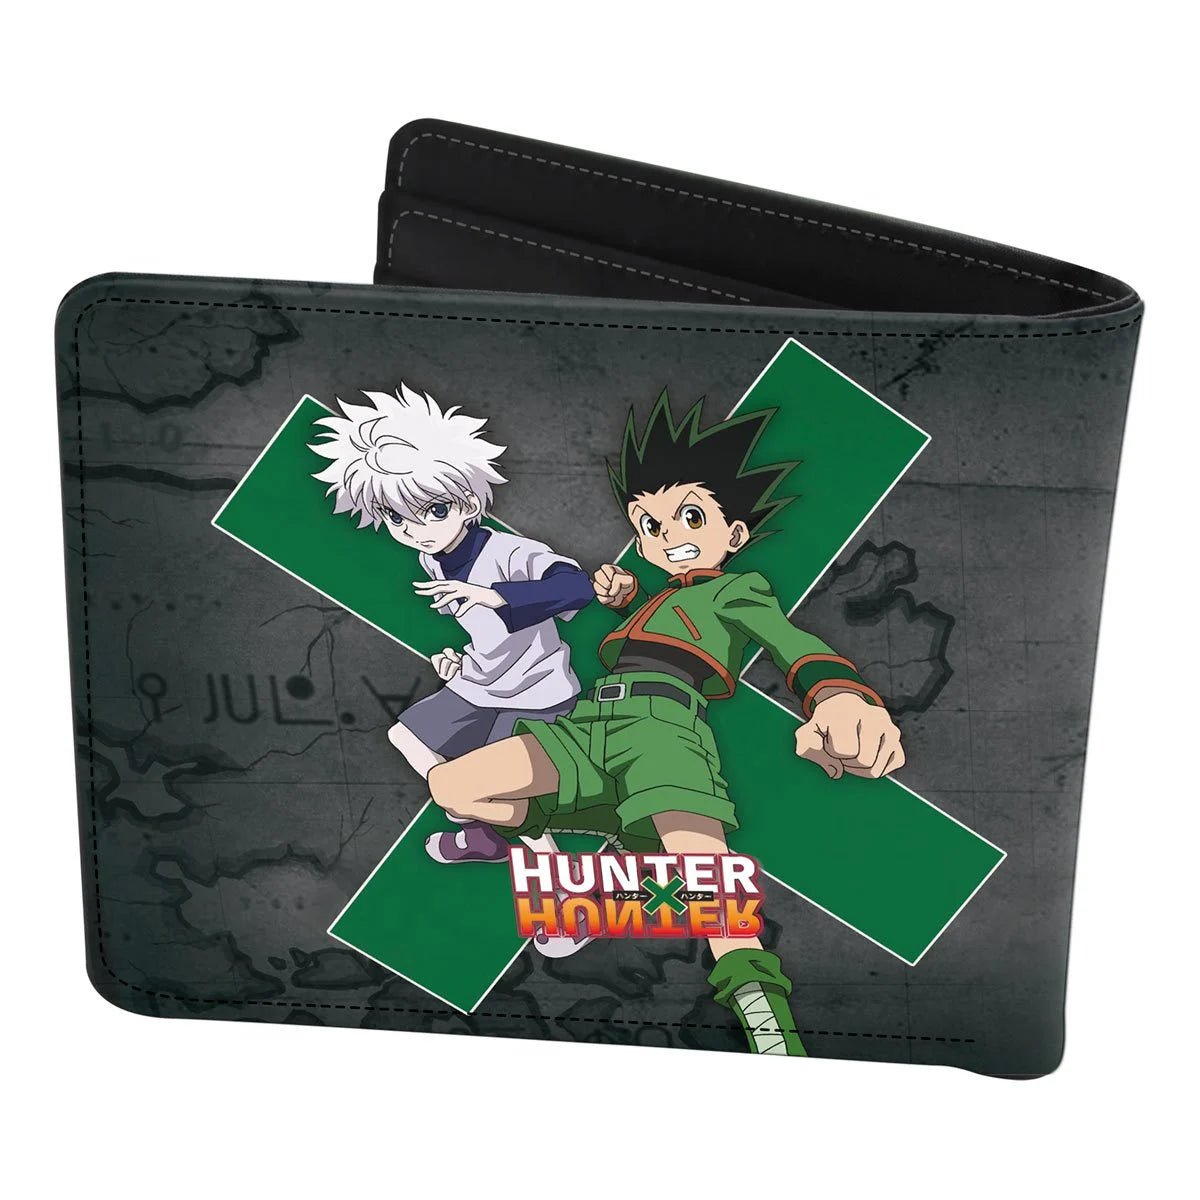 Abysse America - Hunter x Hunter Wallet and Keychain Gift Set - Good Game Anime